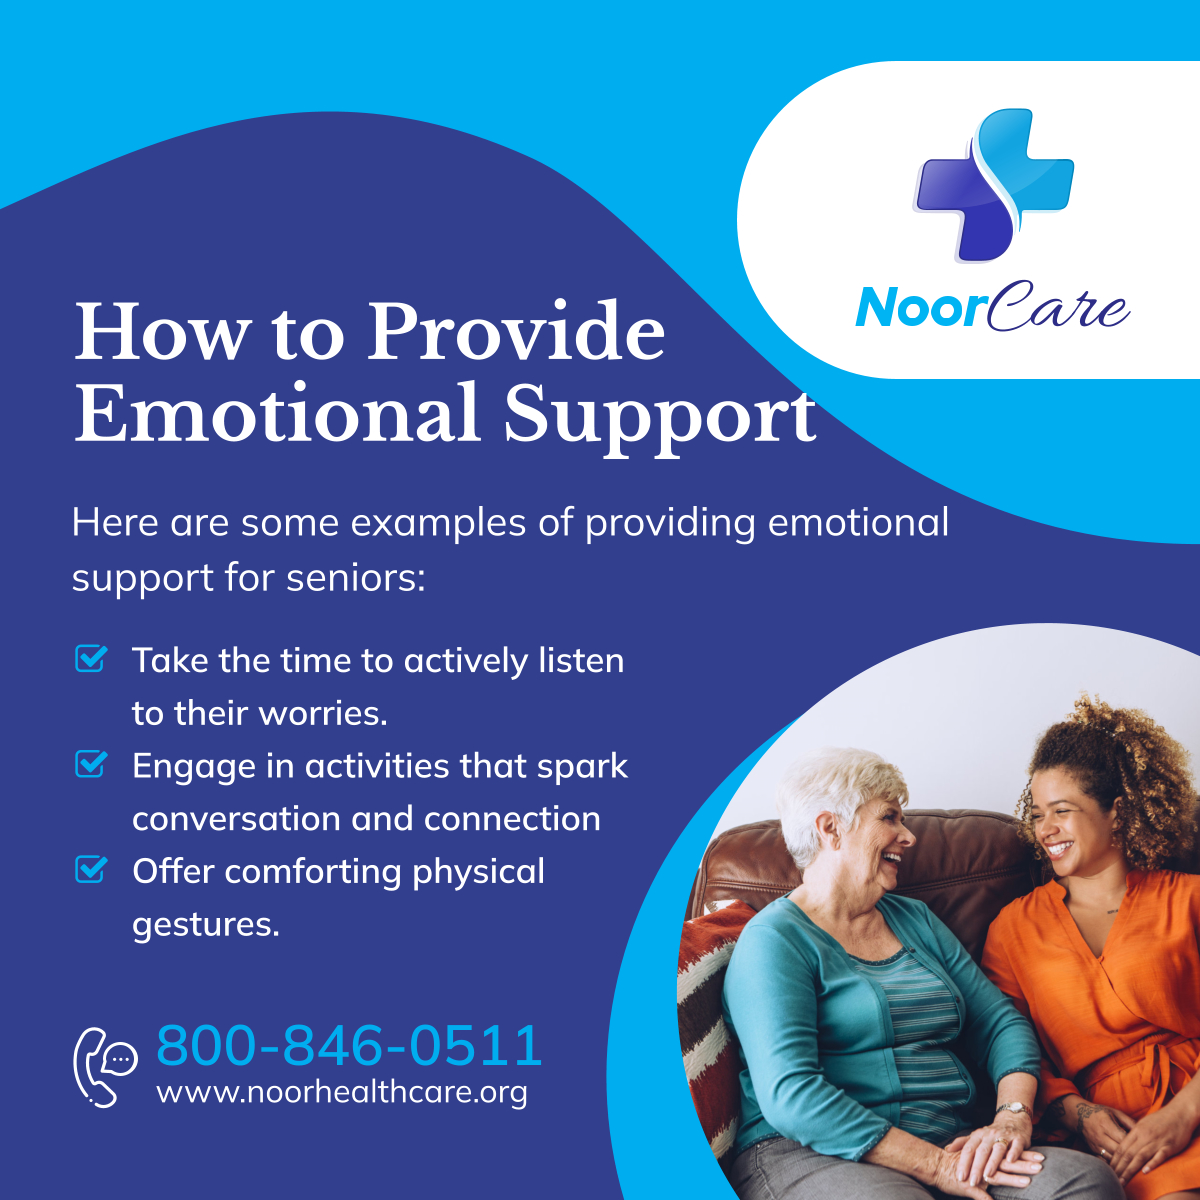 From empathetic listening to meaningful connections and comforting touches, emotional support for seniors fosters well-being and connection. Let's prioritize compassion in senior care. 

#SacramentoCA #HomeCare #SeniorWellness